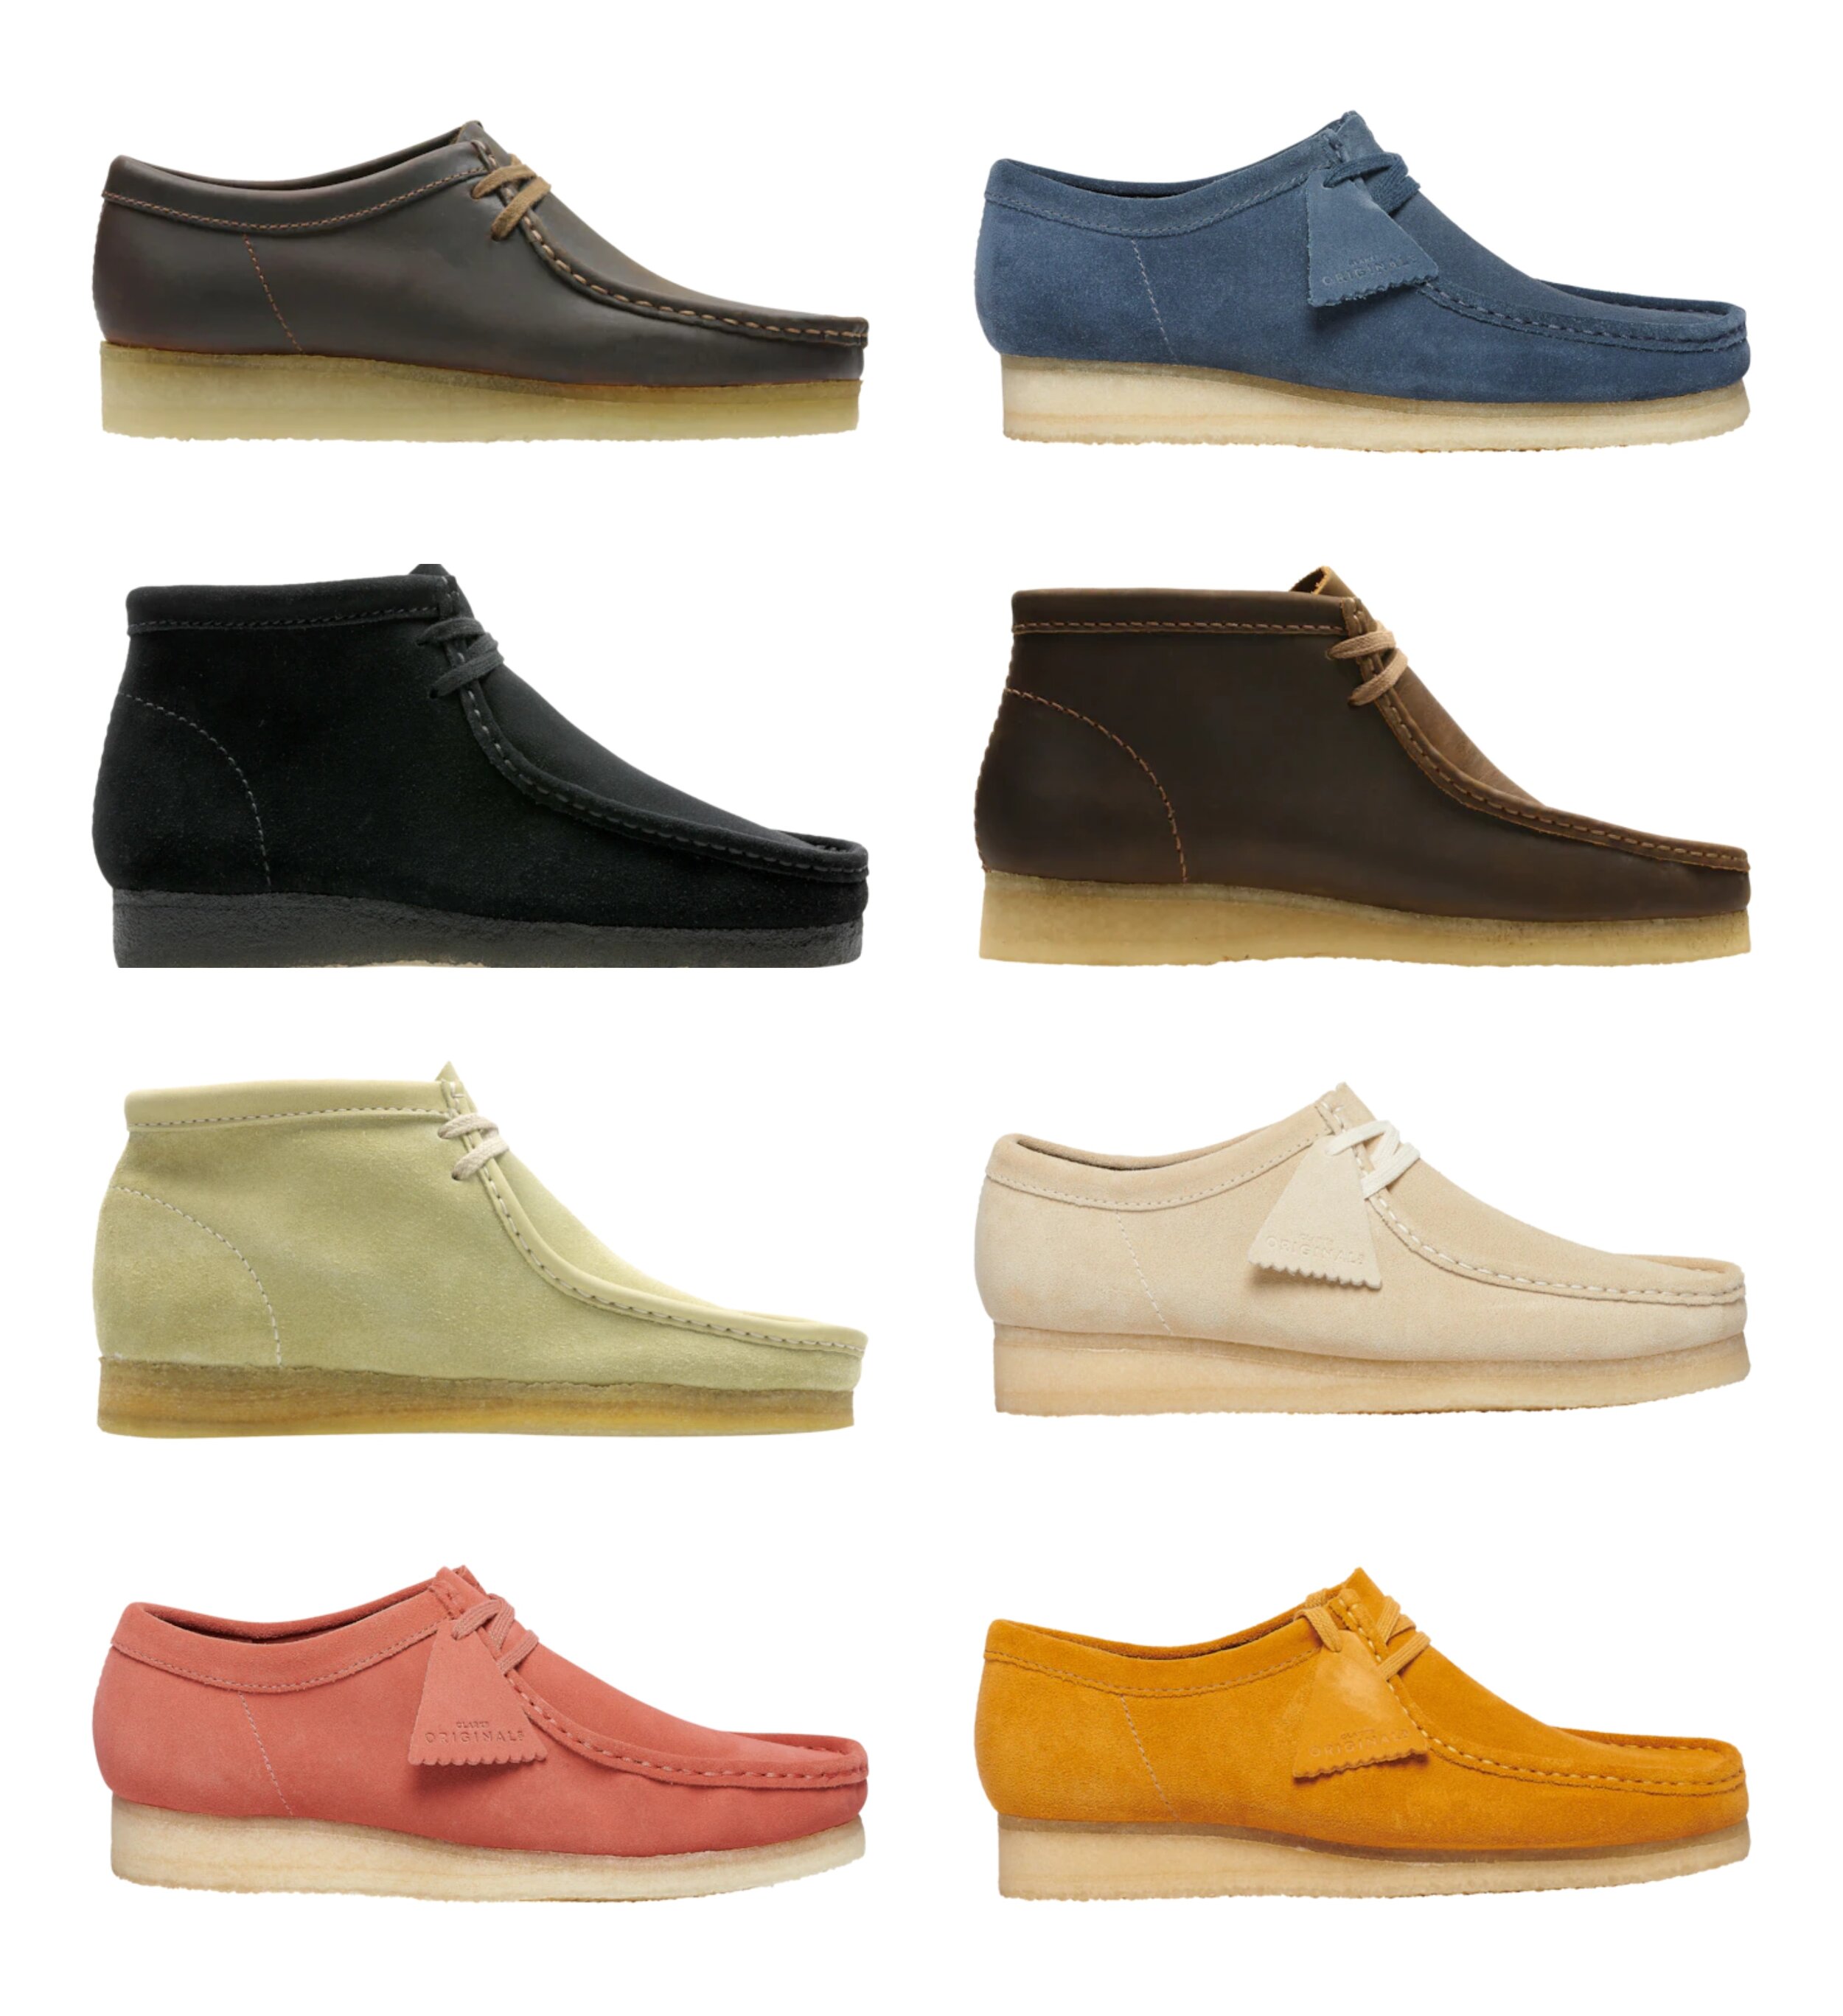 clarks wallabee boots sale